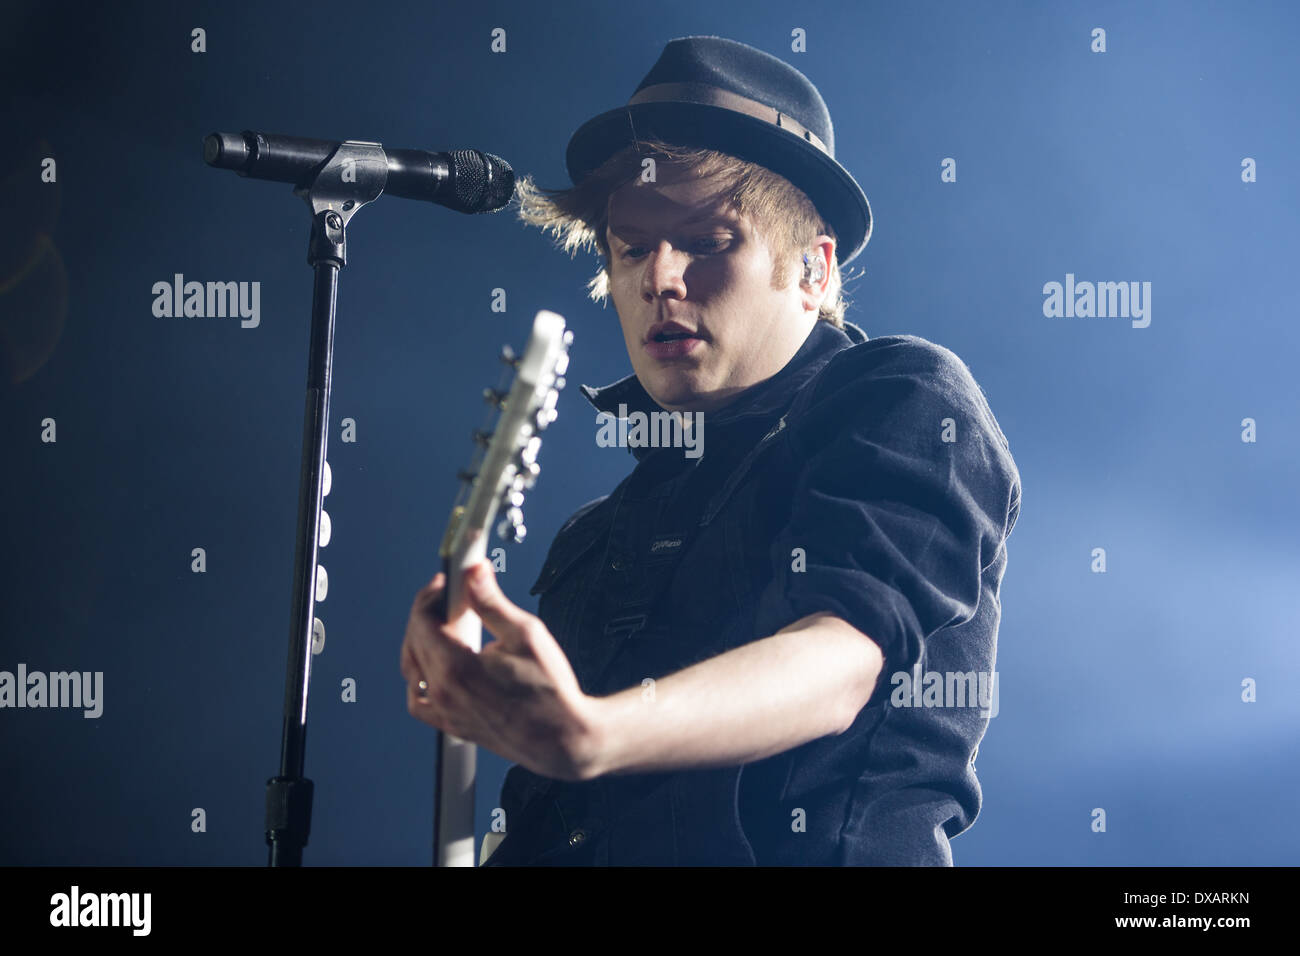 US rock band Fall Out Boy performing in Cardiff Motorpoint Arena, UK, on their Save Rock & Roll Tour in March 2014. Stock Photo